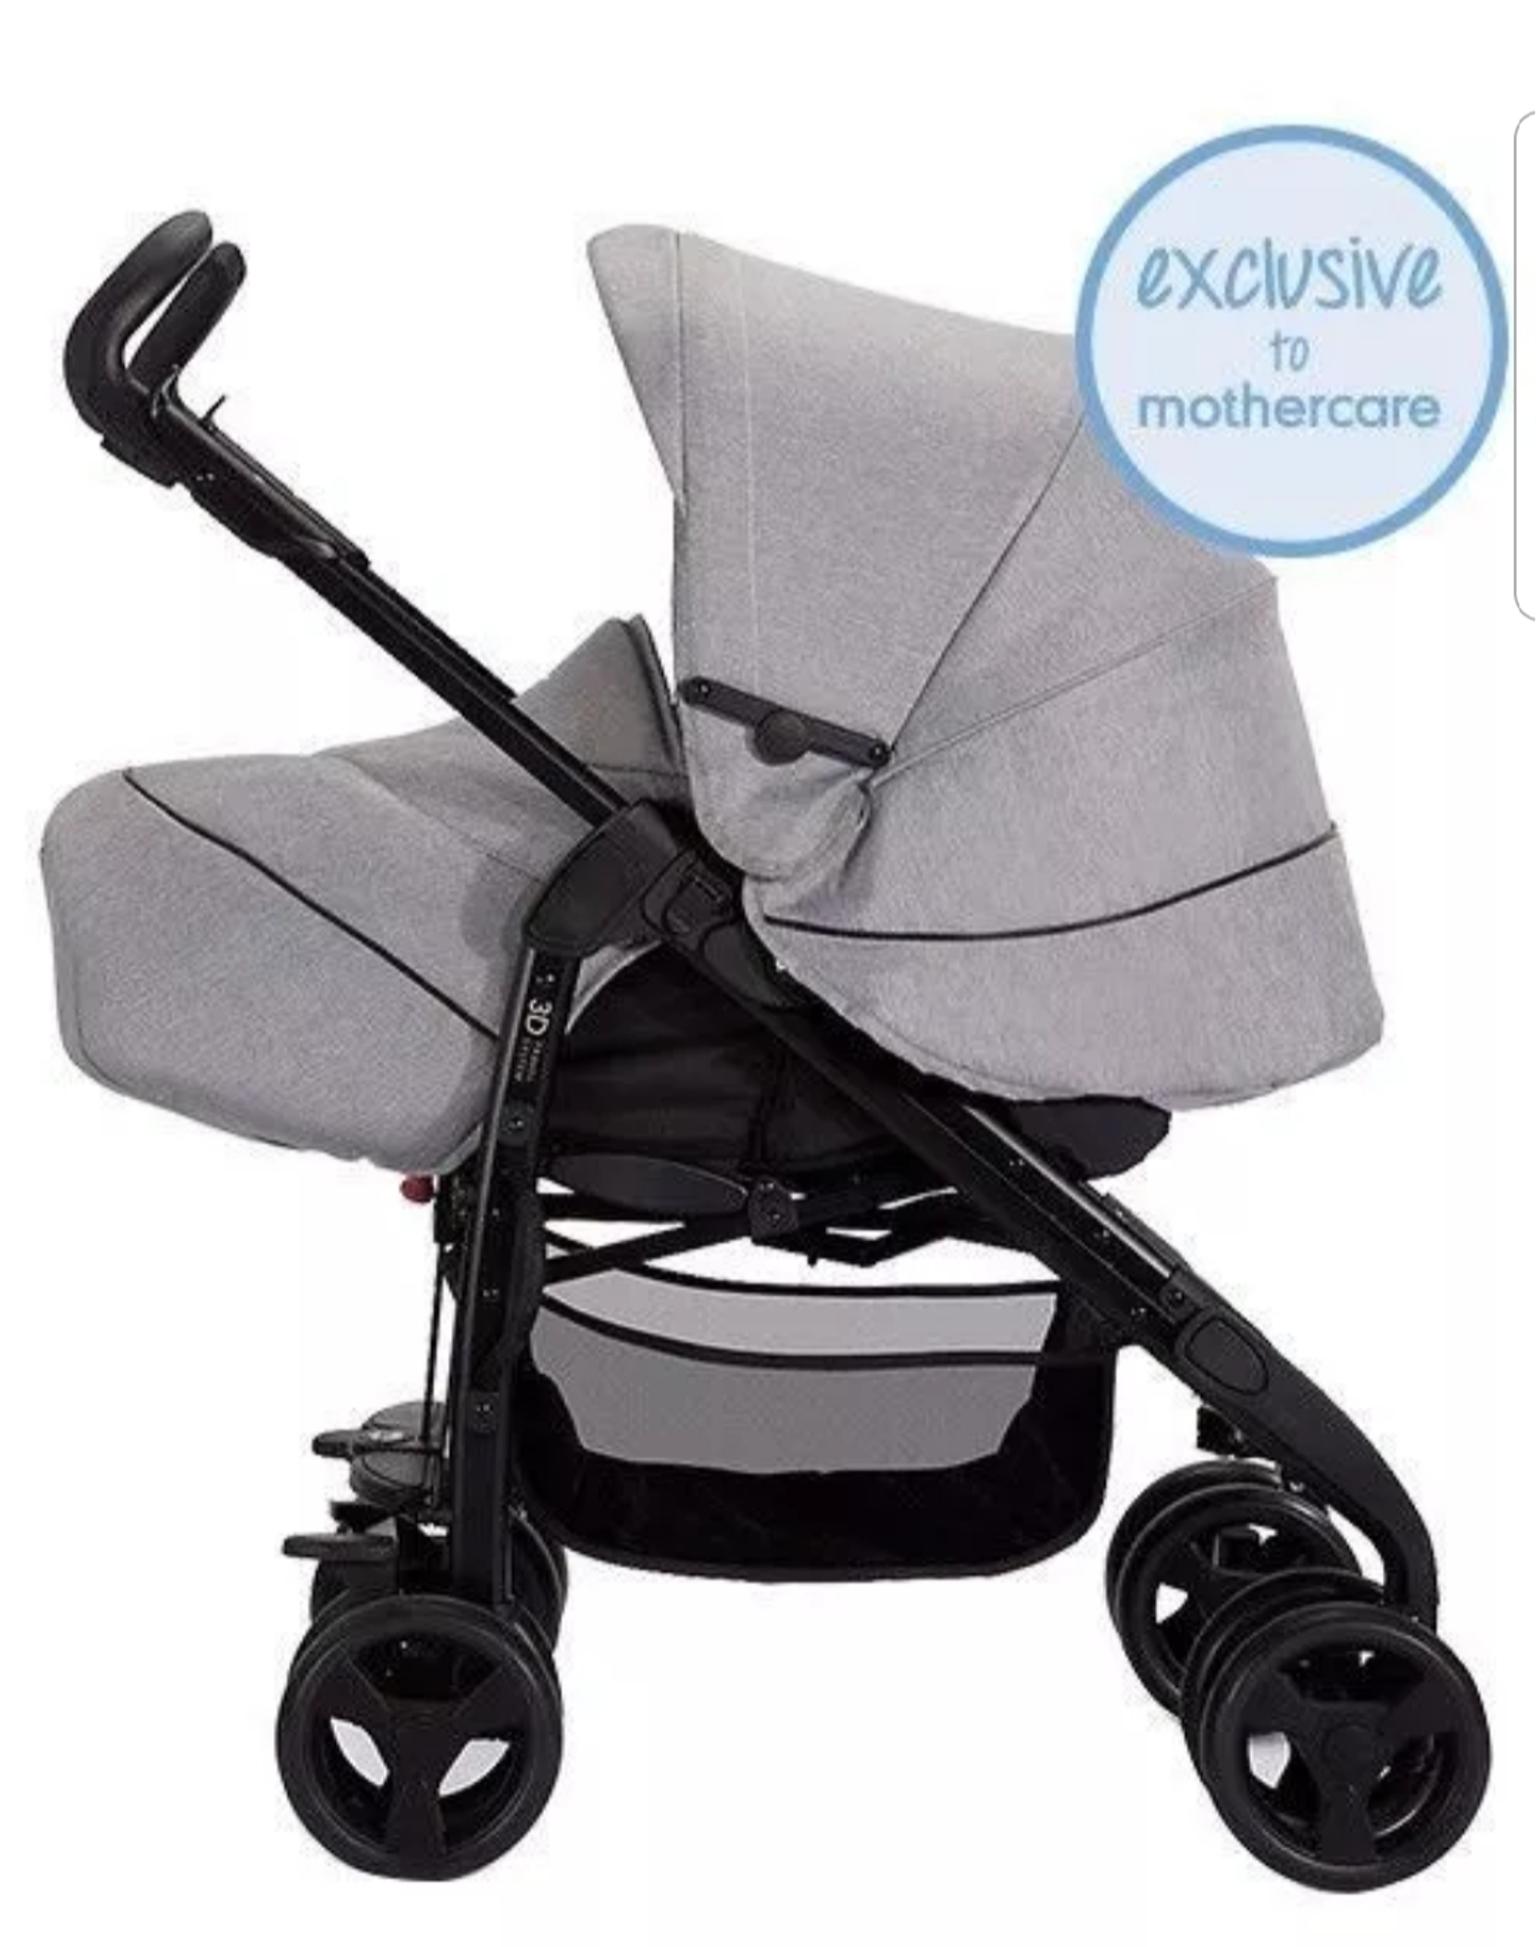 mothercare silver cross travel system